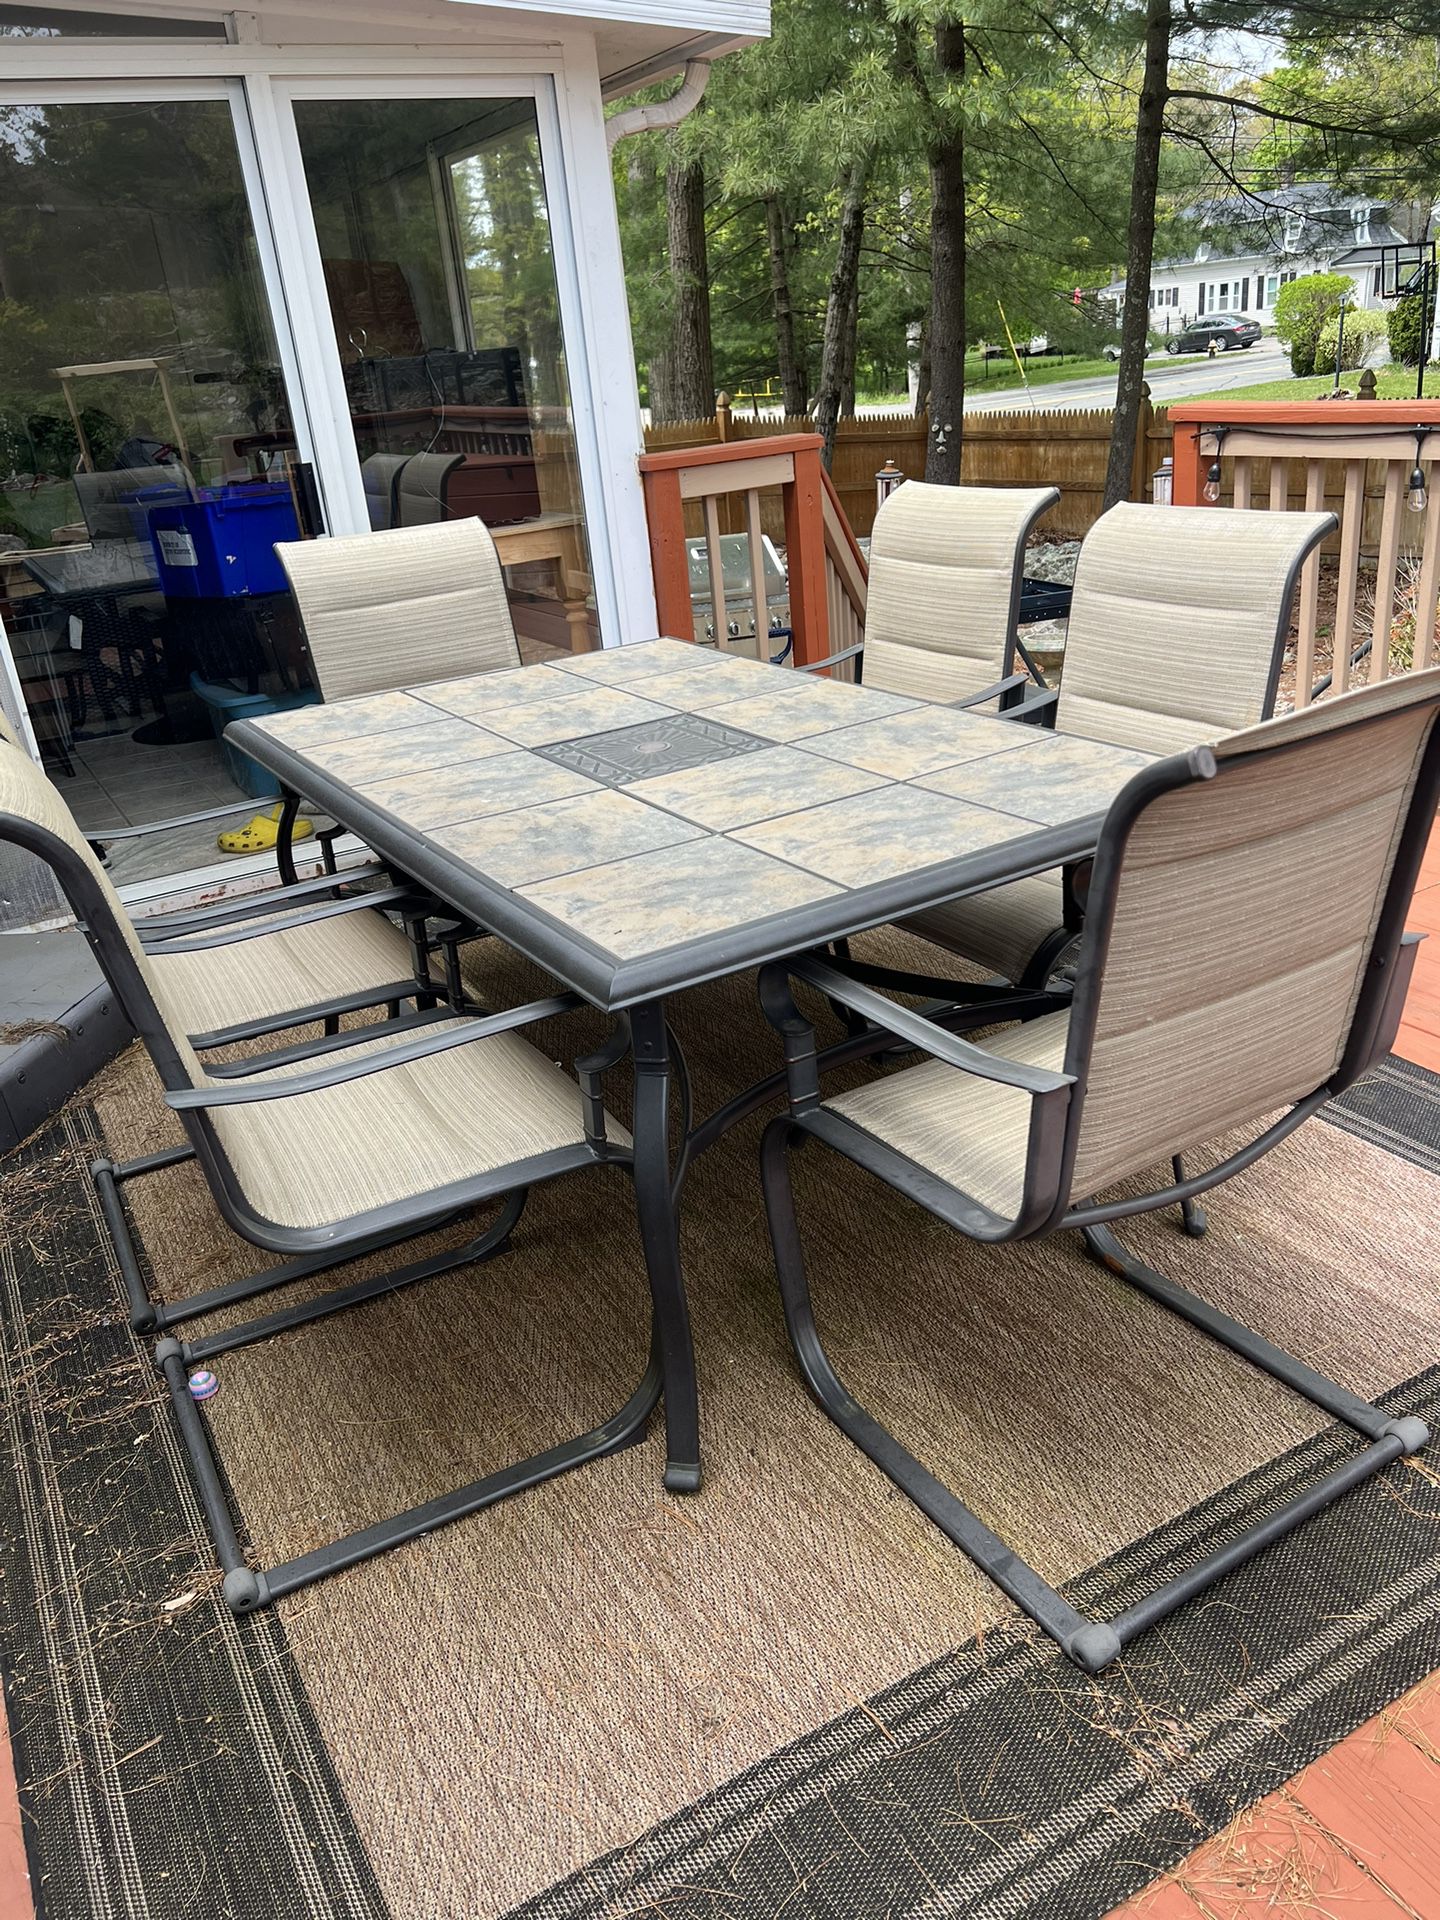 Patio Dining Table Set